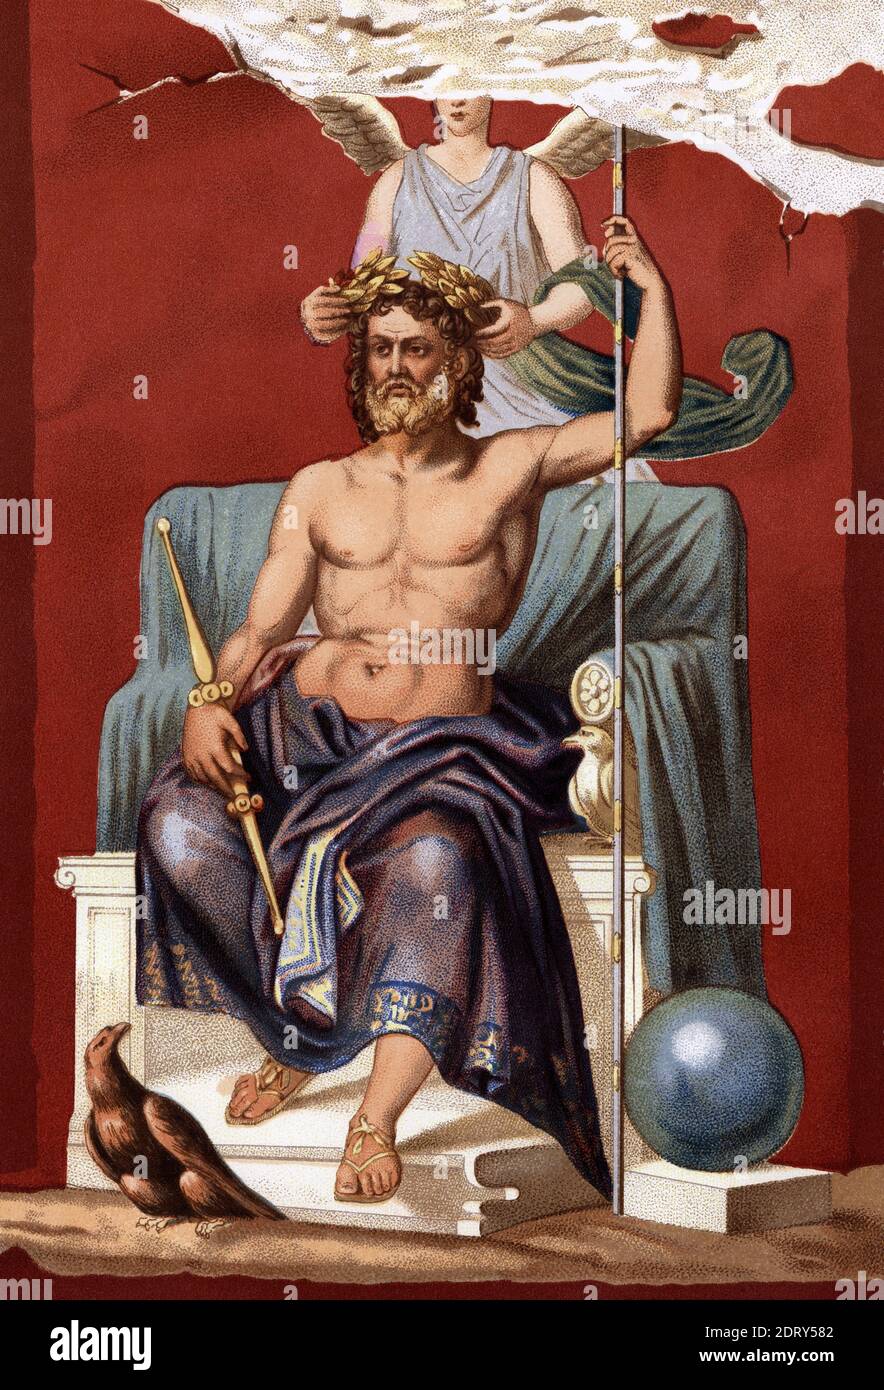 Jupiter or Jove, King of the Gods in mythology and venerated in ancient Rome.  In this 19th century chromolithograph after a work by Etienne Antoine Eugene Ronjat, Victory places a wreath on his head. Stock Photo